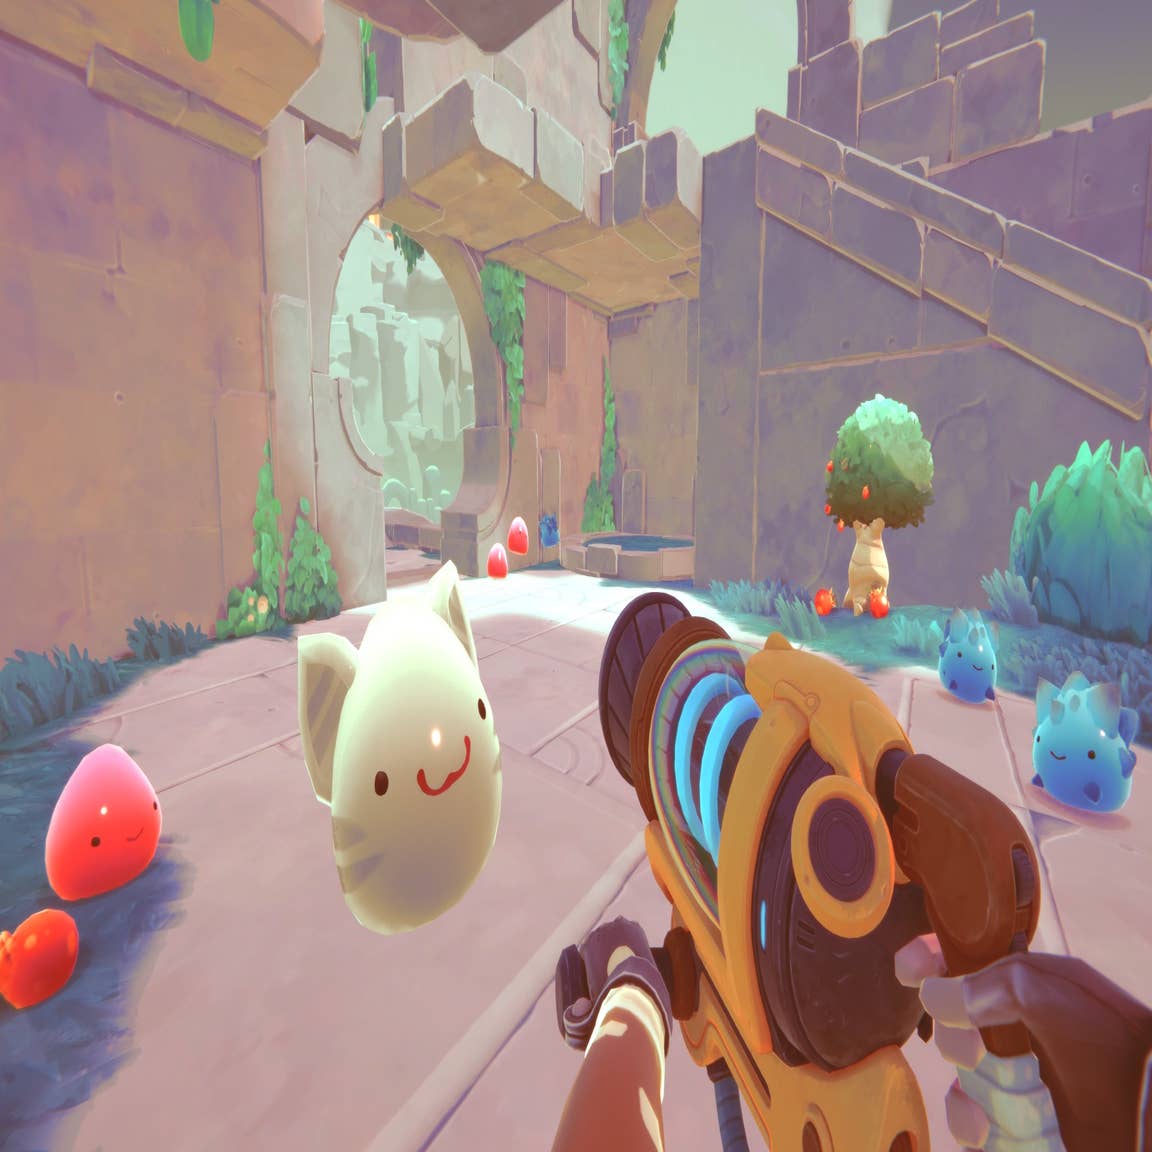 Monomi Park Shows Off Different Biomes of Slime Rancher 2